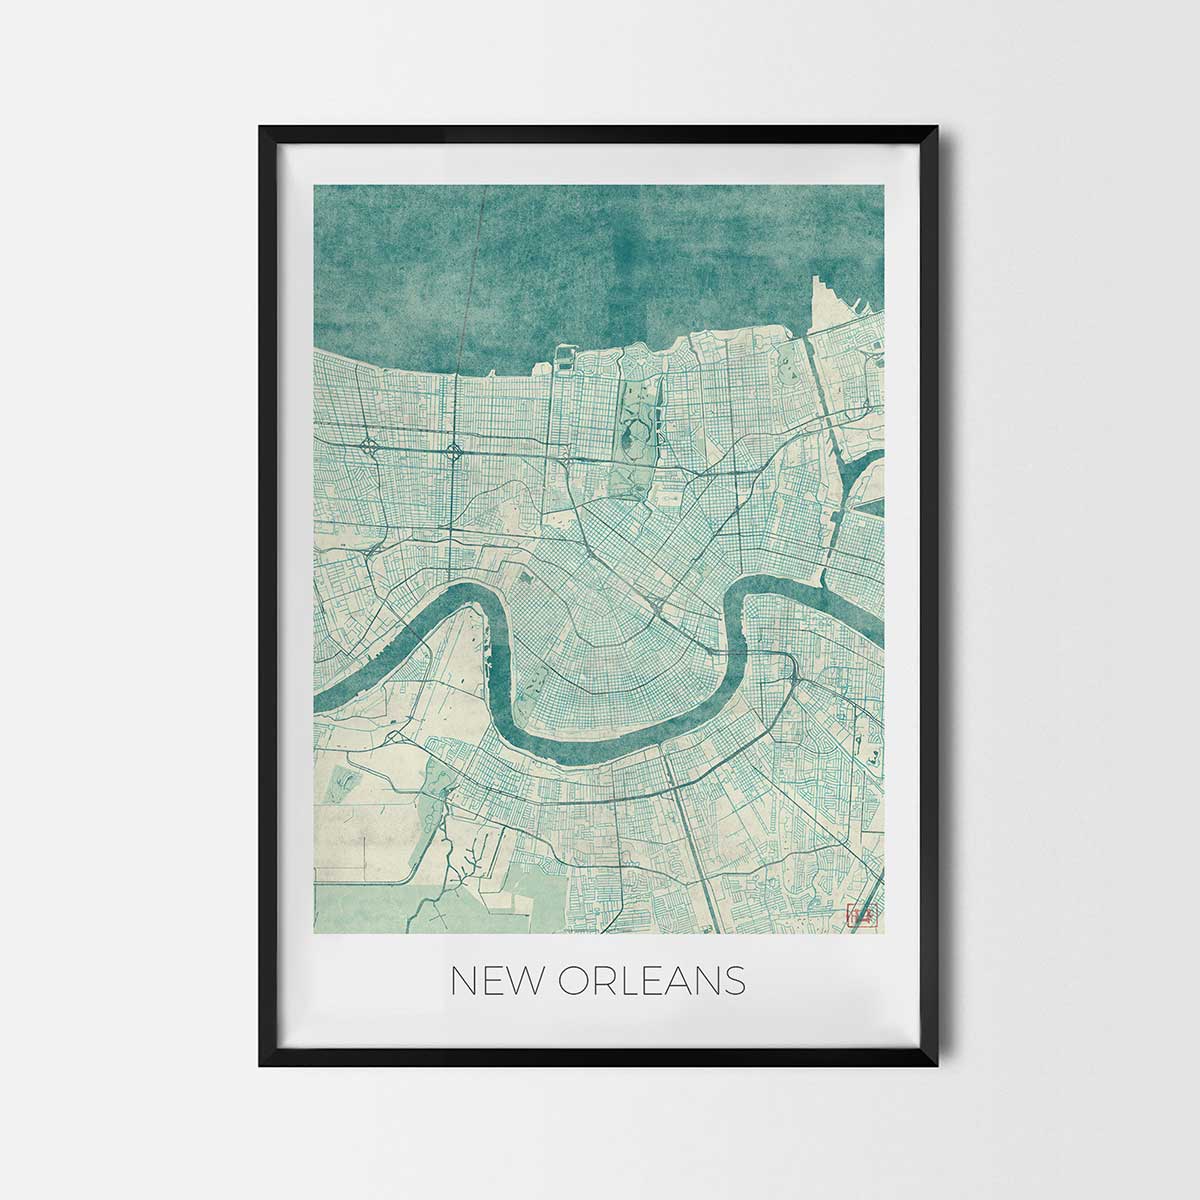 New Orleans art posters city map art posters map posters city art prints city posters